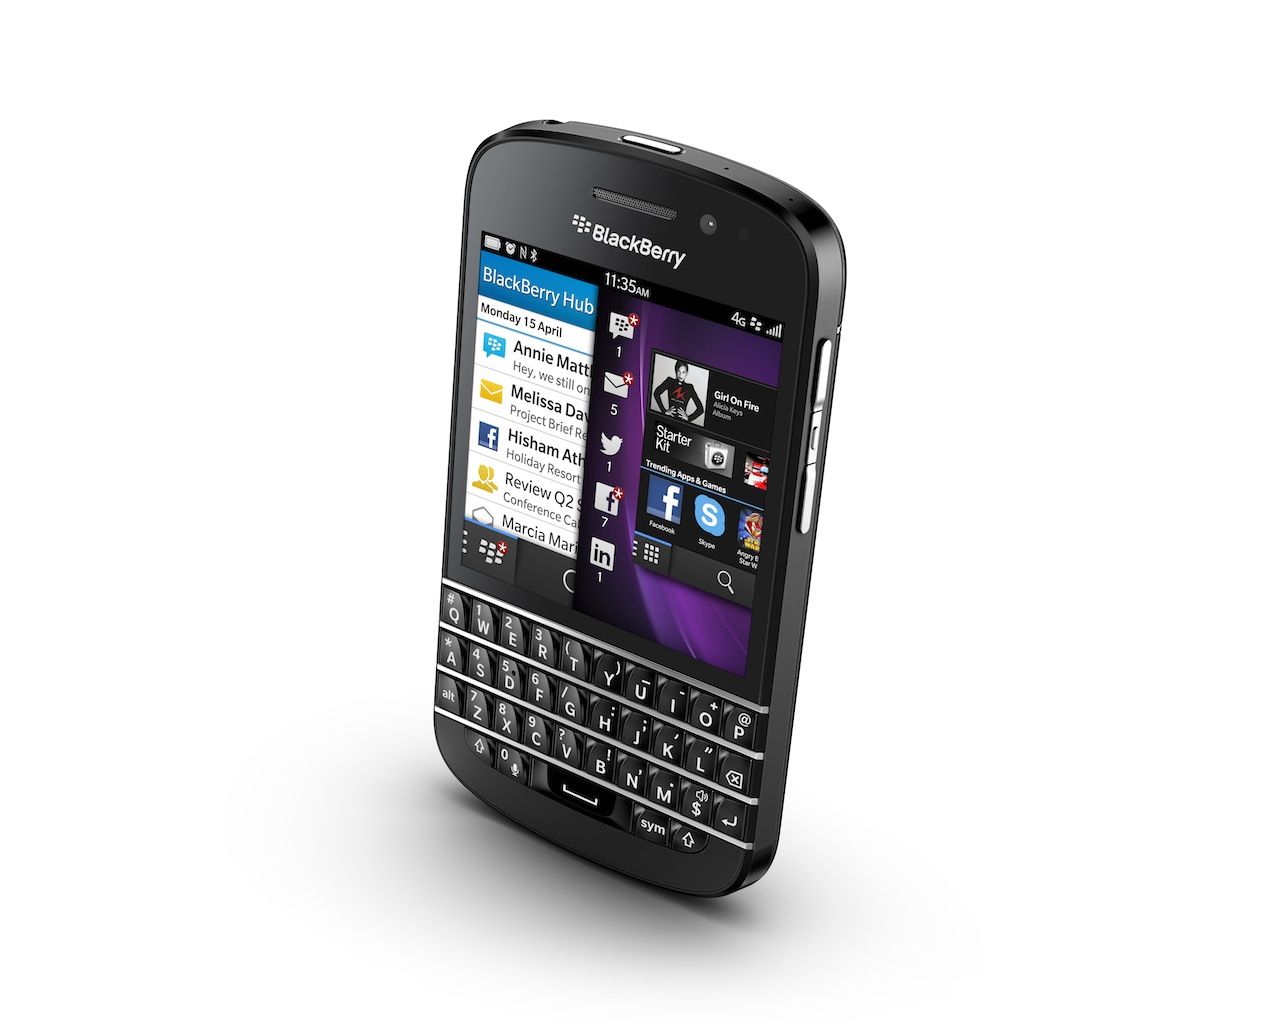 Work easier on the go with Blackberry Q10